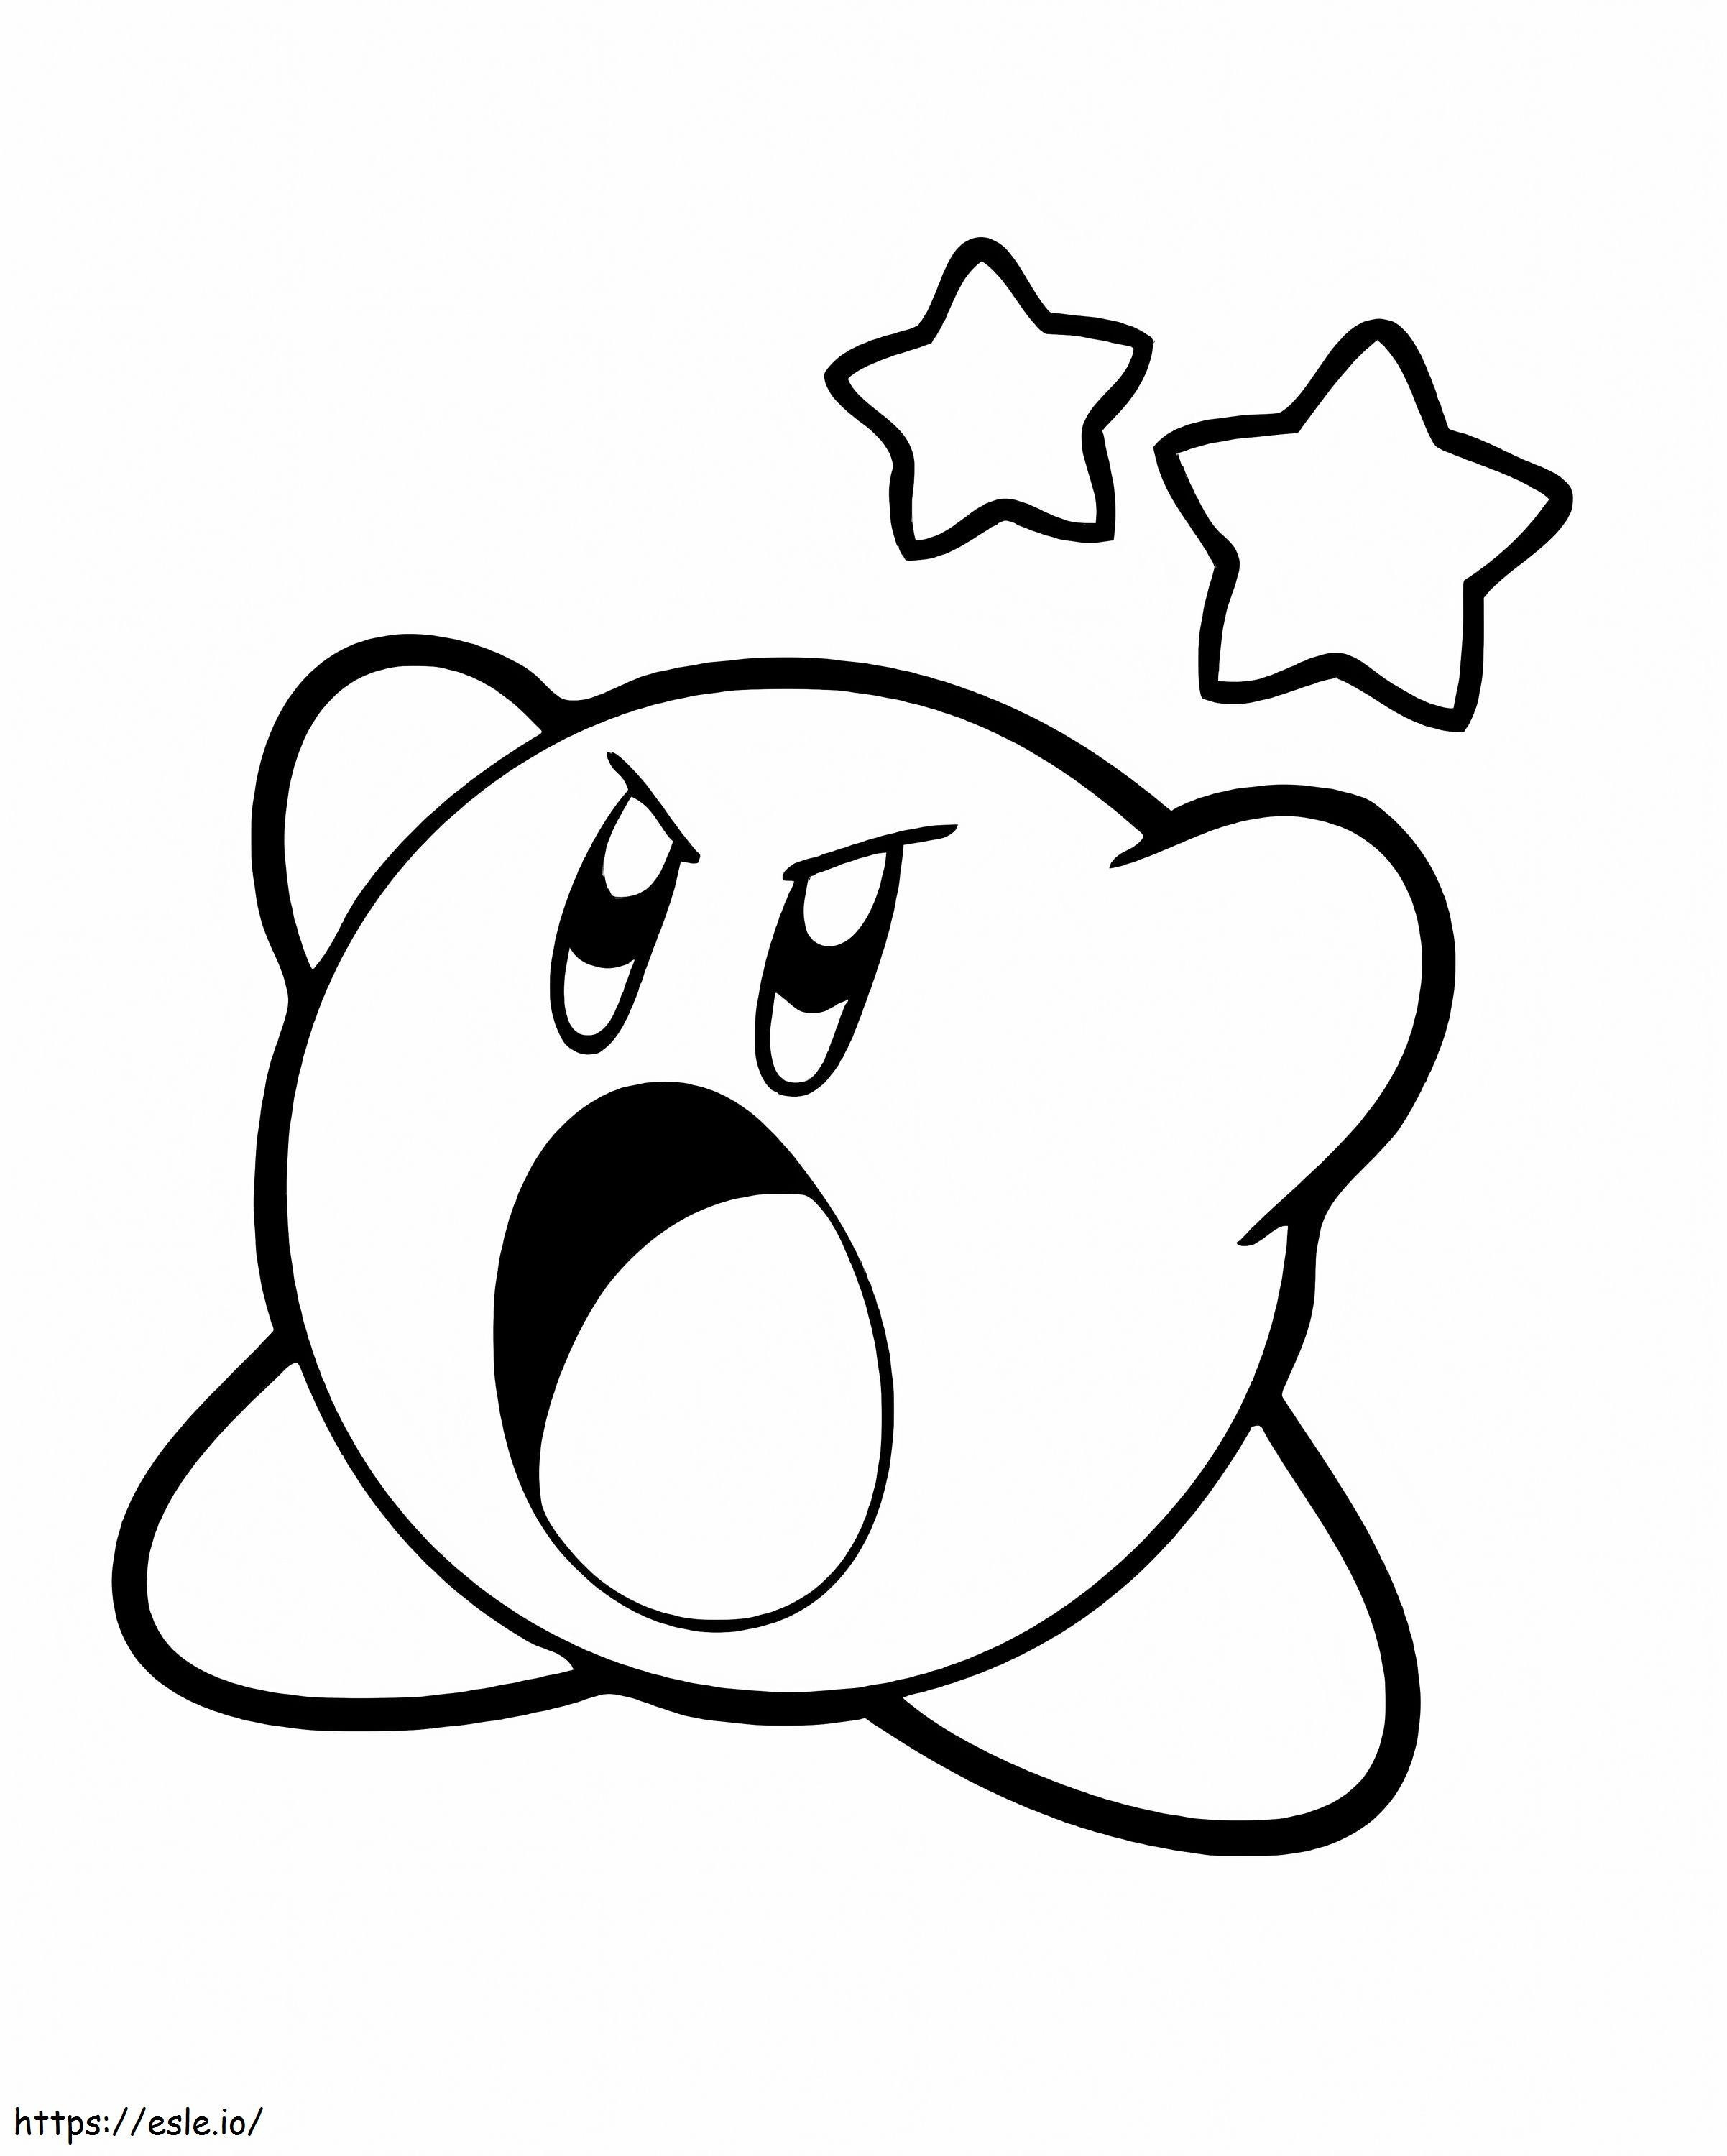 Kirby With Two Stars coloring page